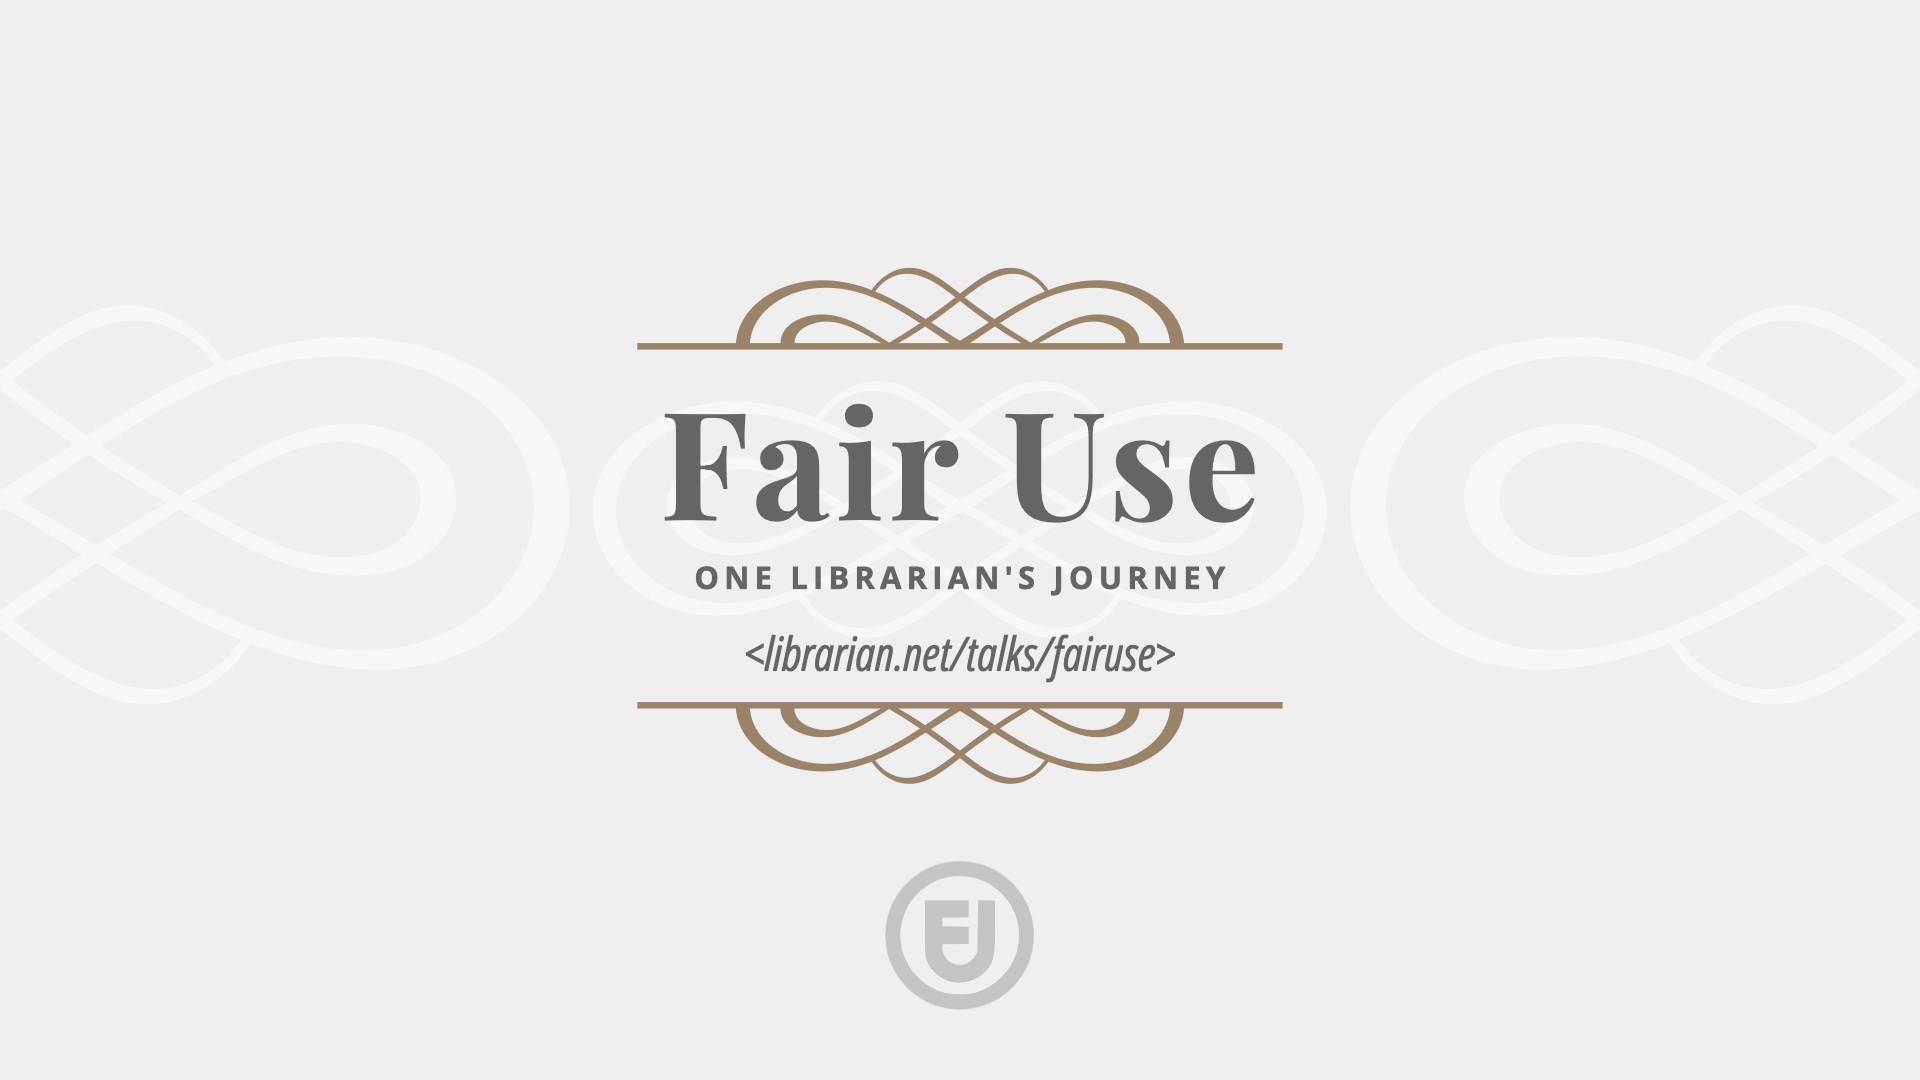 TITLE: Fair Use, One Librarian's Journey, with URL and fair use logo